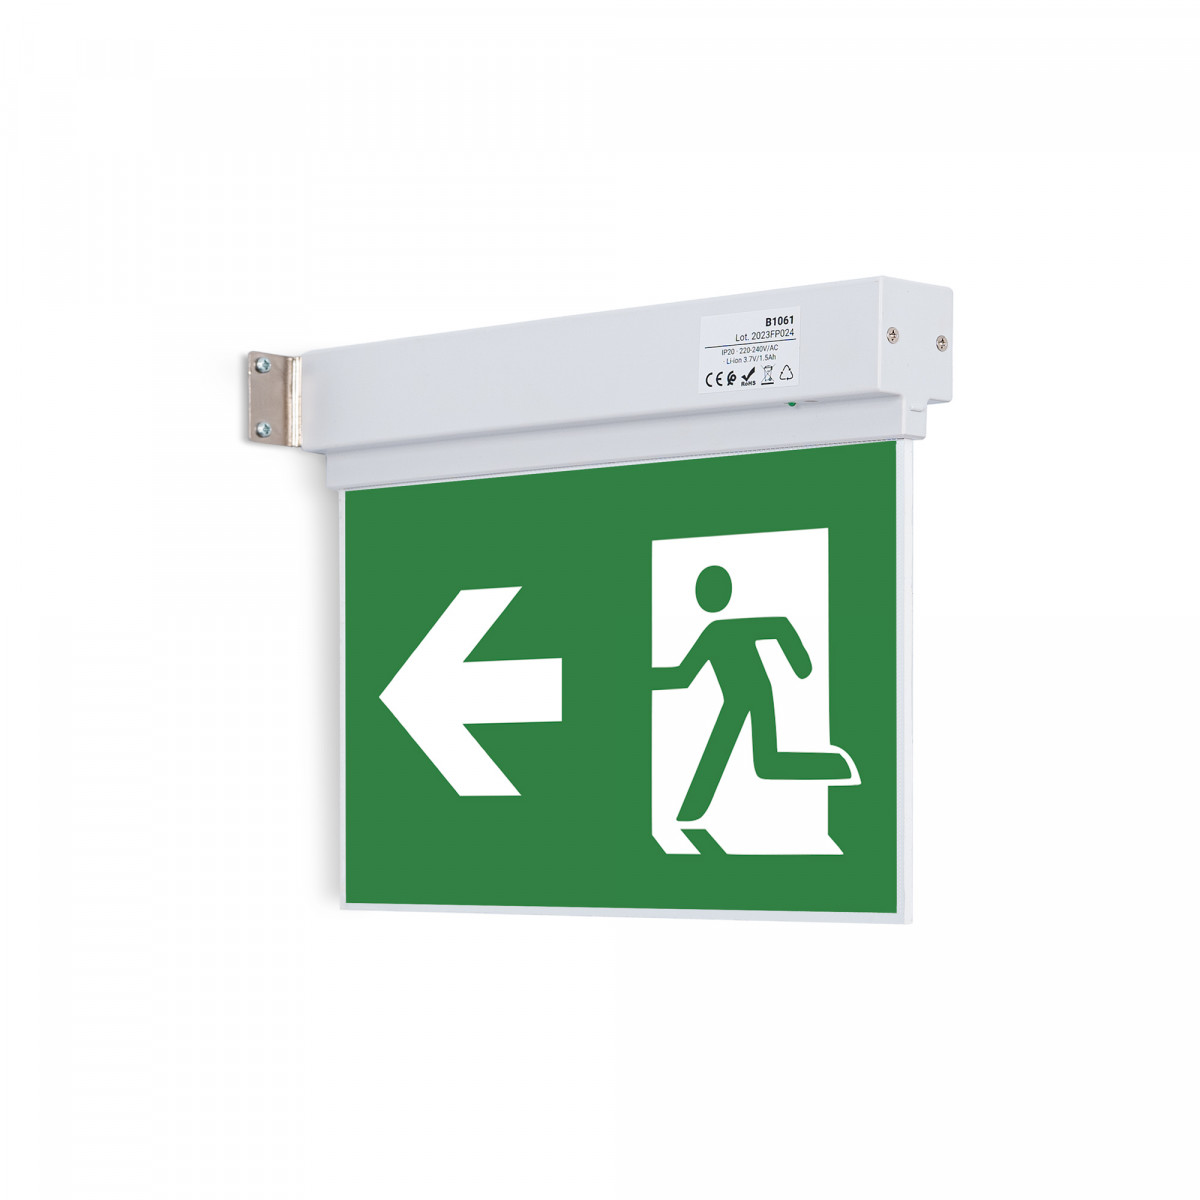 Surface emergency light with pictogram "Side exit".